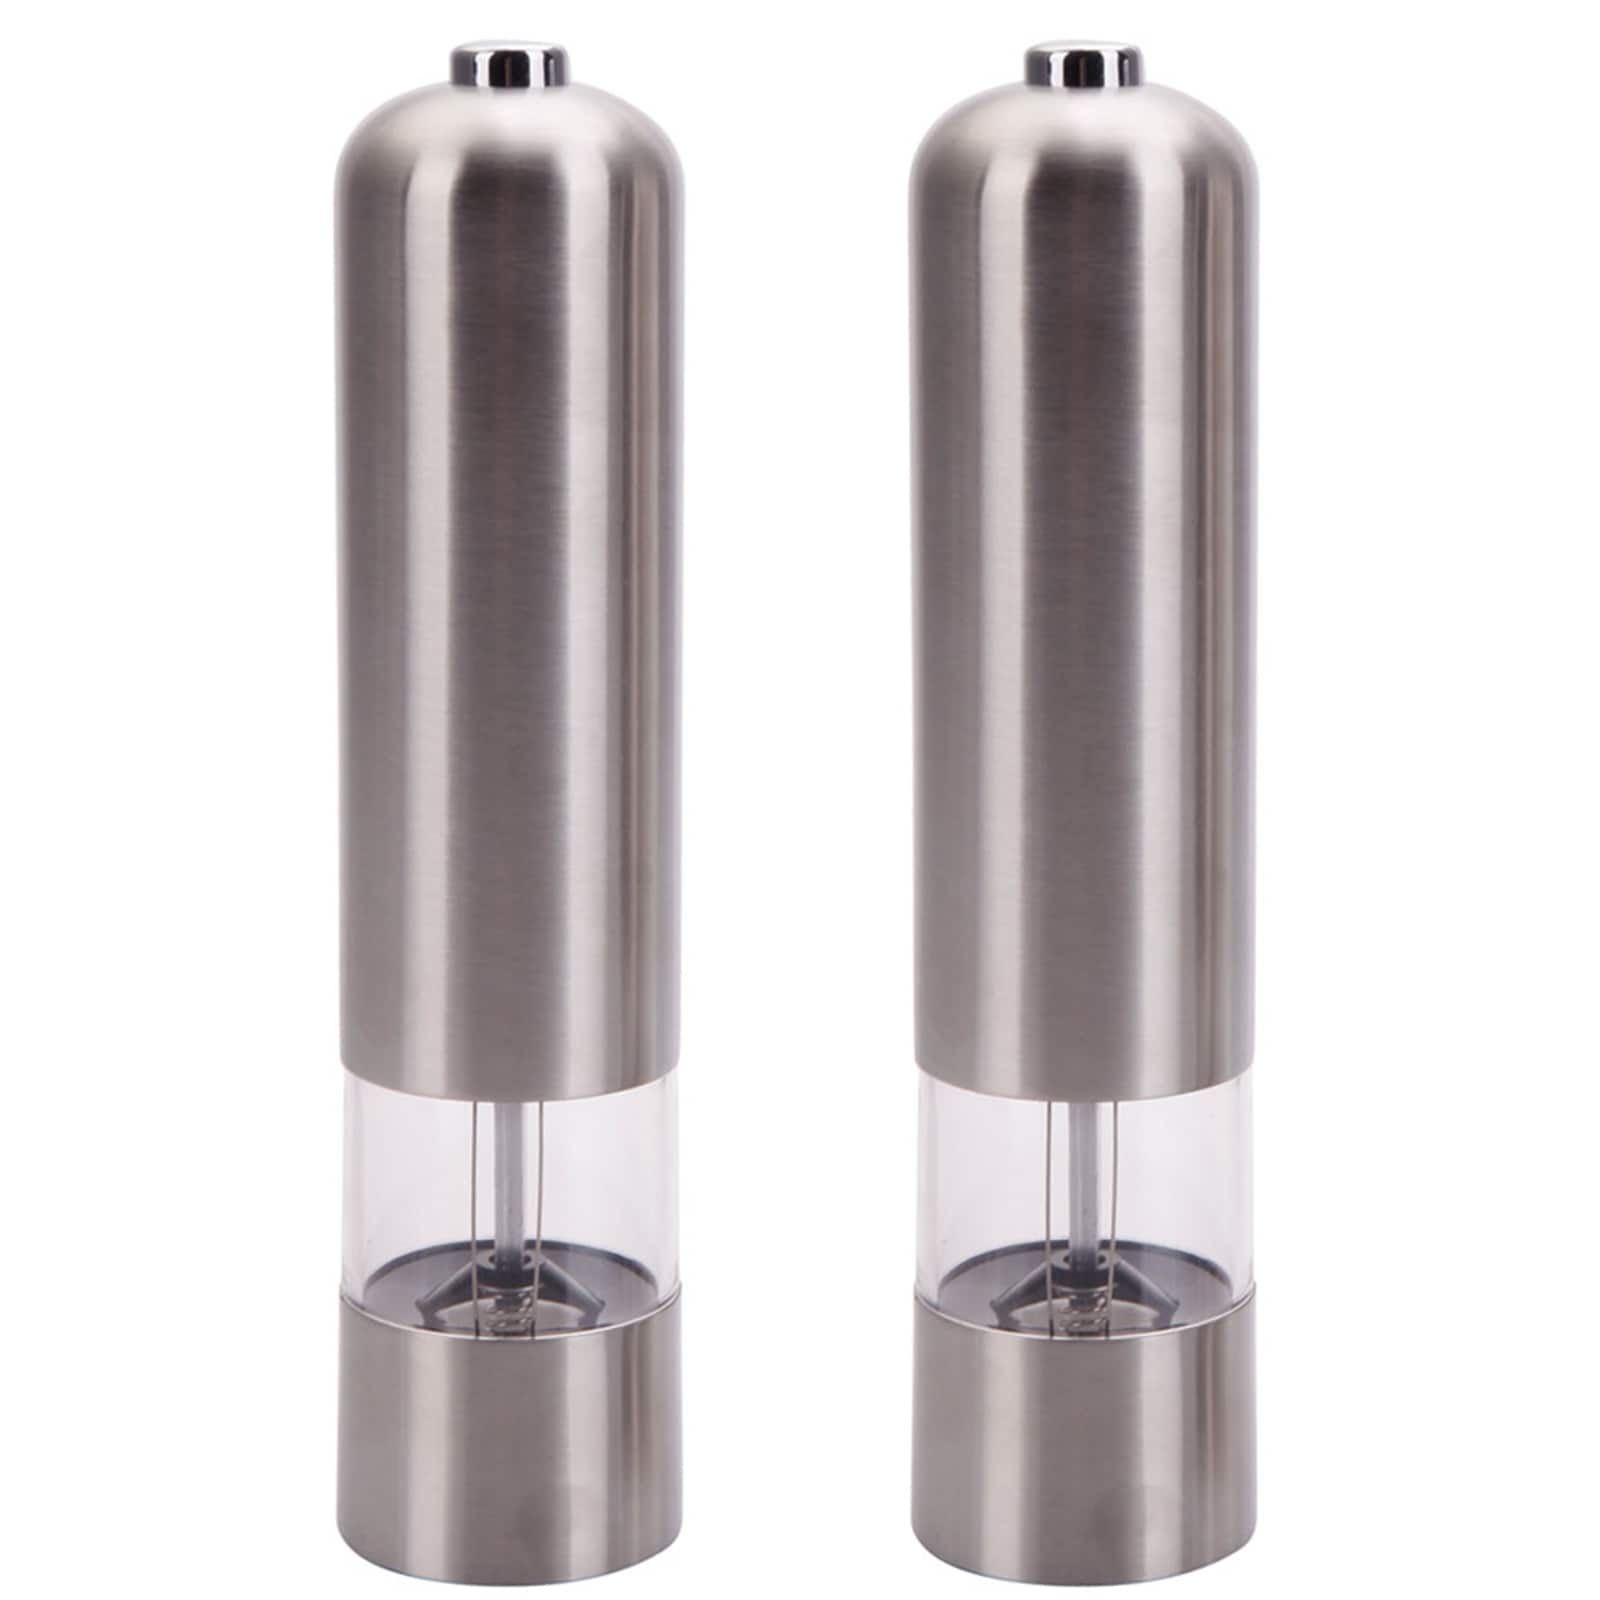 https://ak1.ostkcdn.com/images/products/is/images/direct/e148395fe4baa583a95471777f05f80214507ba3/High-grade-Stainless-Steel-Electric-Automatic-Pepper-Mills-Salt-Grinder.jpg